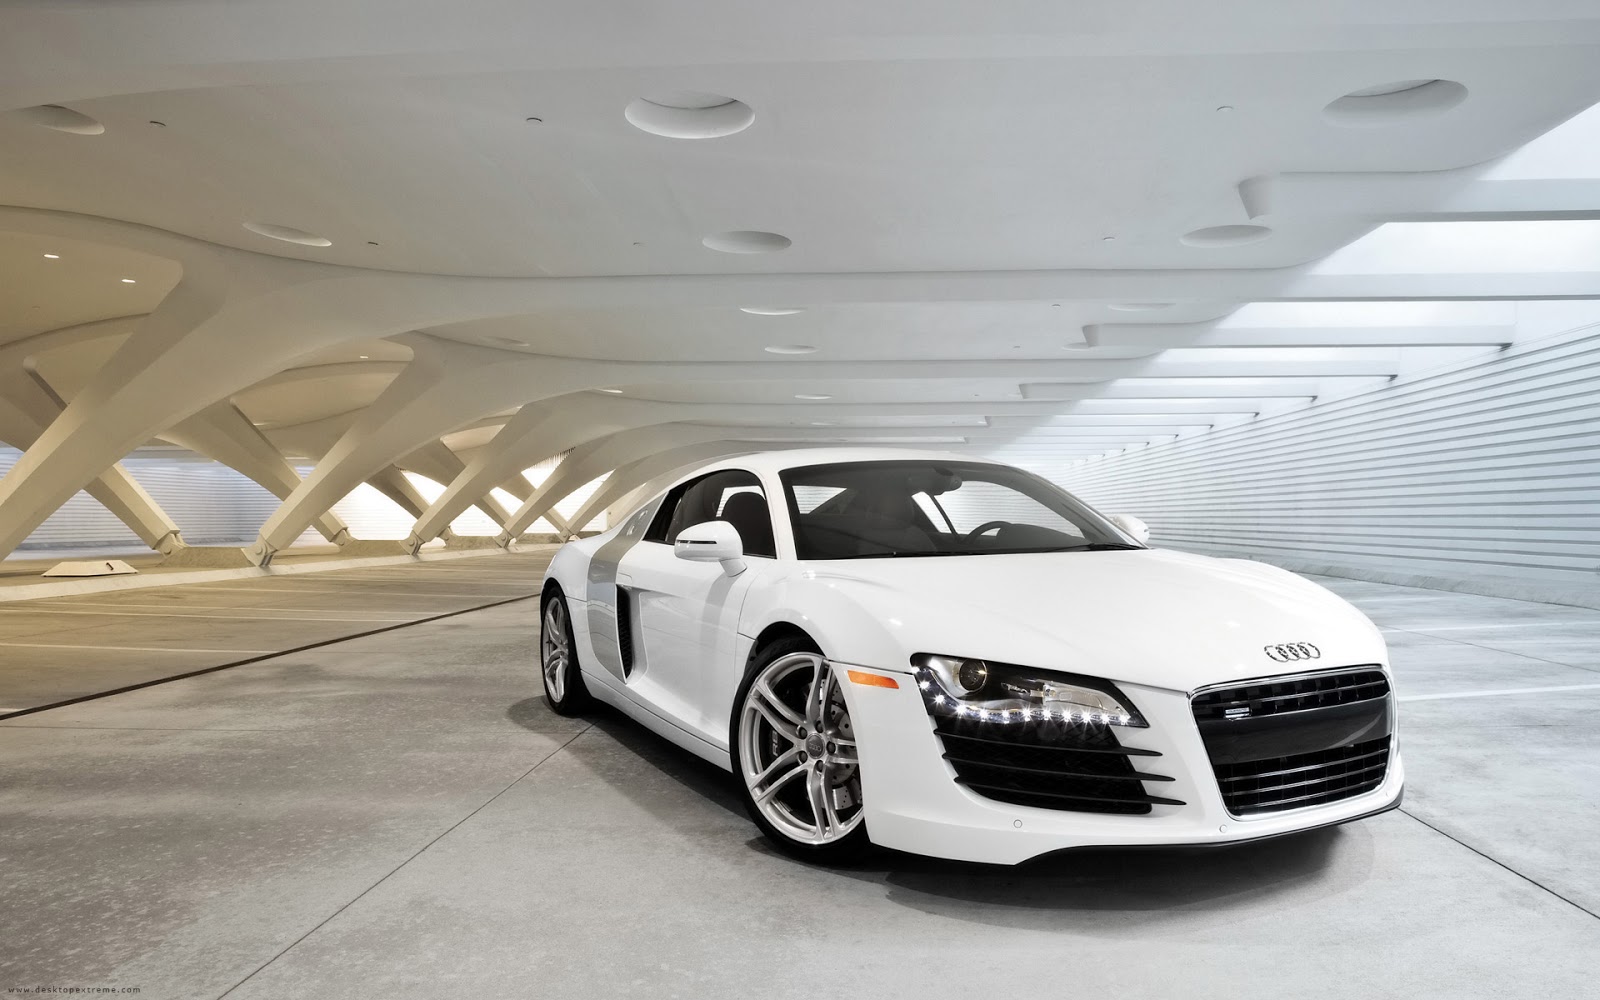 Audi A8 hd Wallpapers 2011